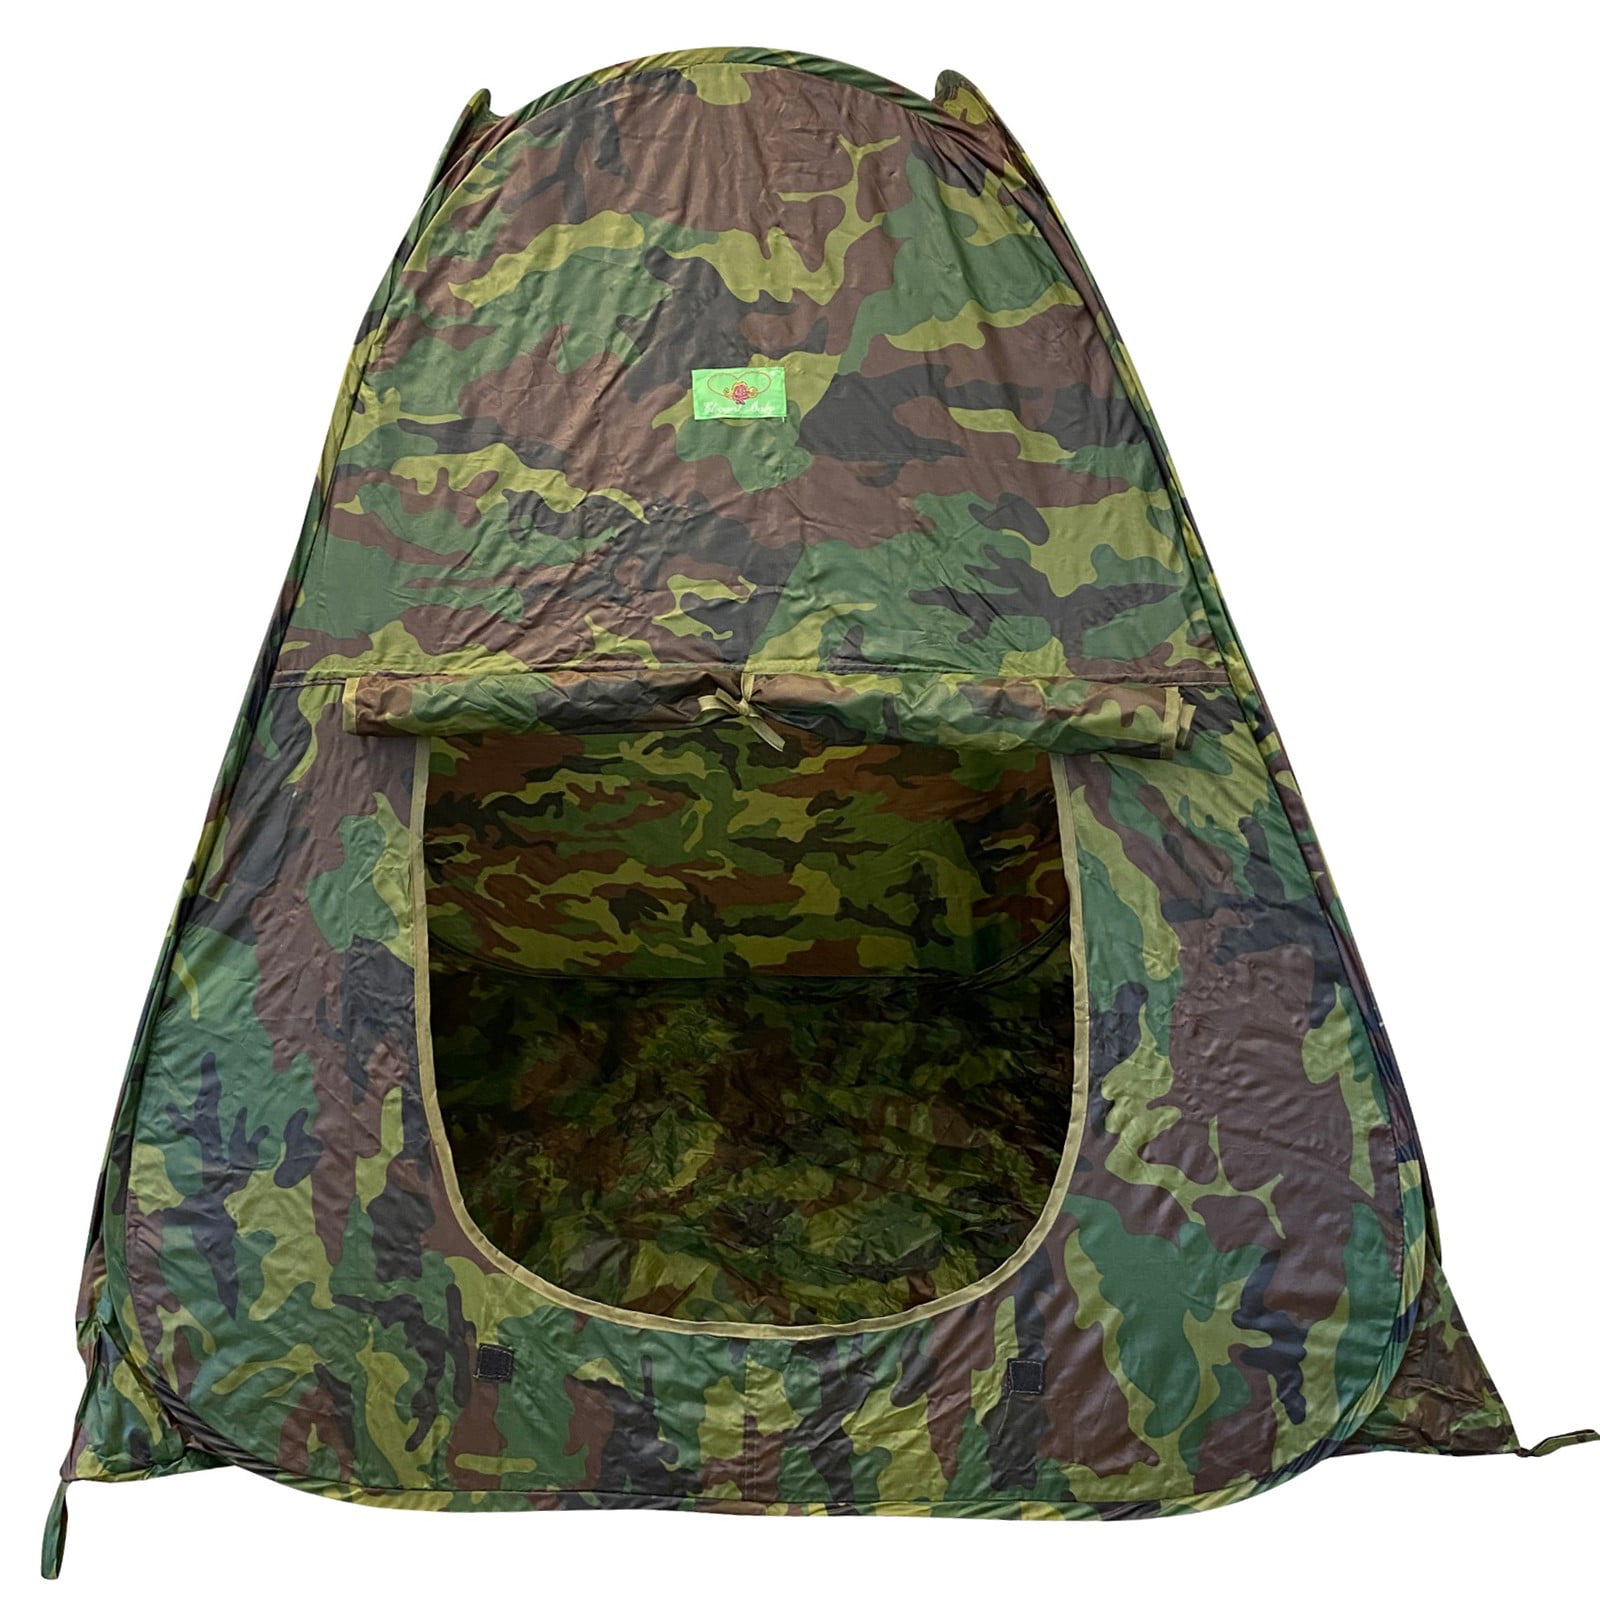 Portable Play Tent Indoor/Out Camouflage Military Pop Up Play Tent Collapsible 